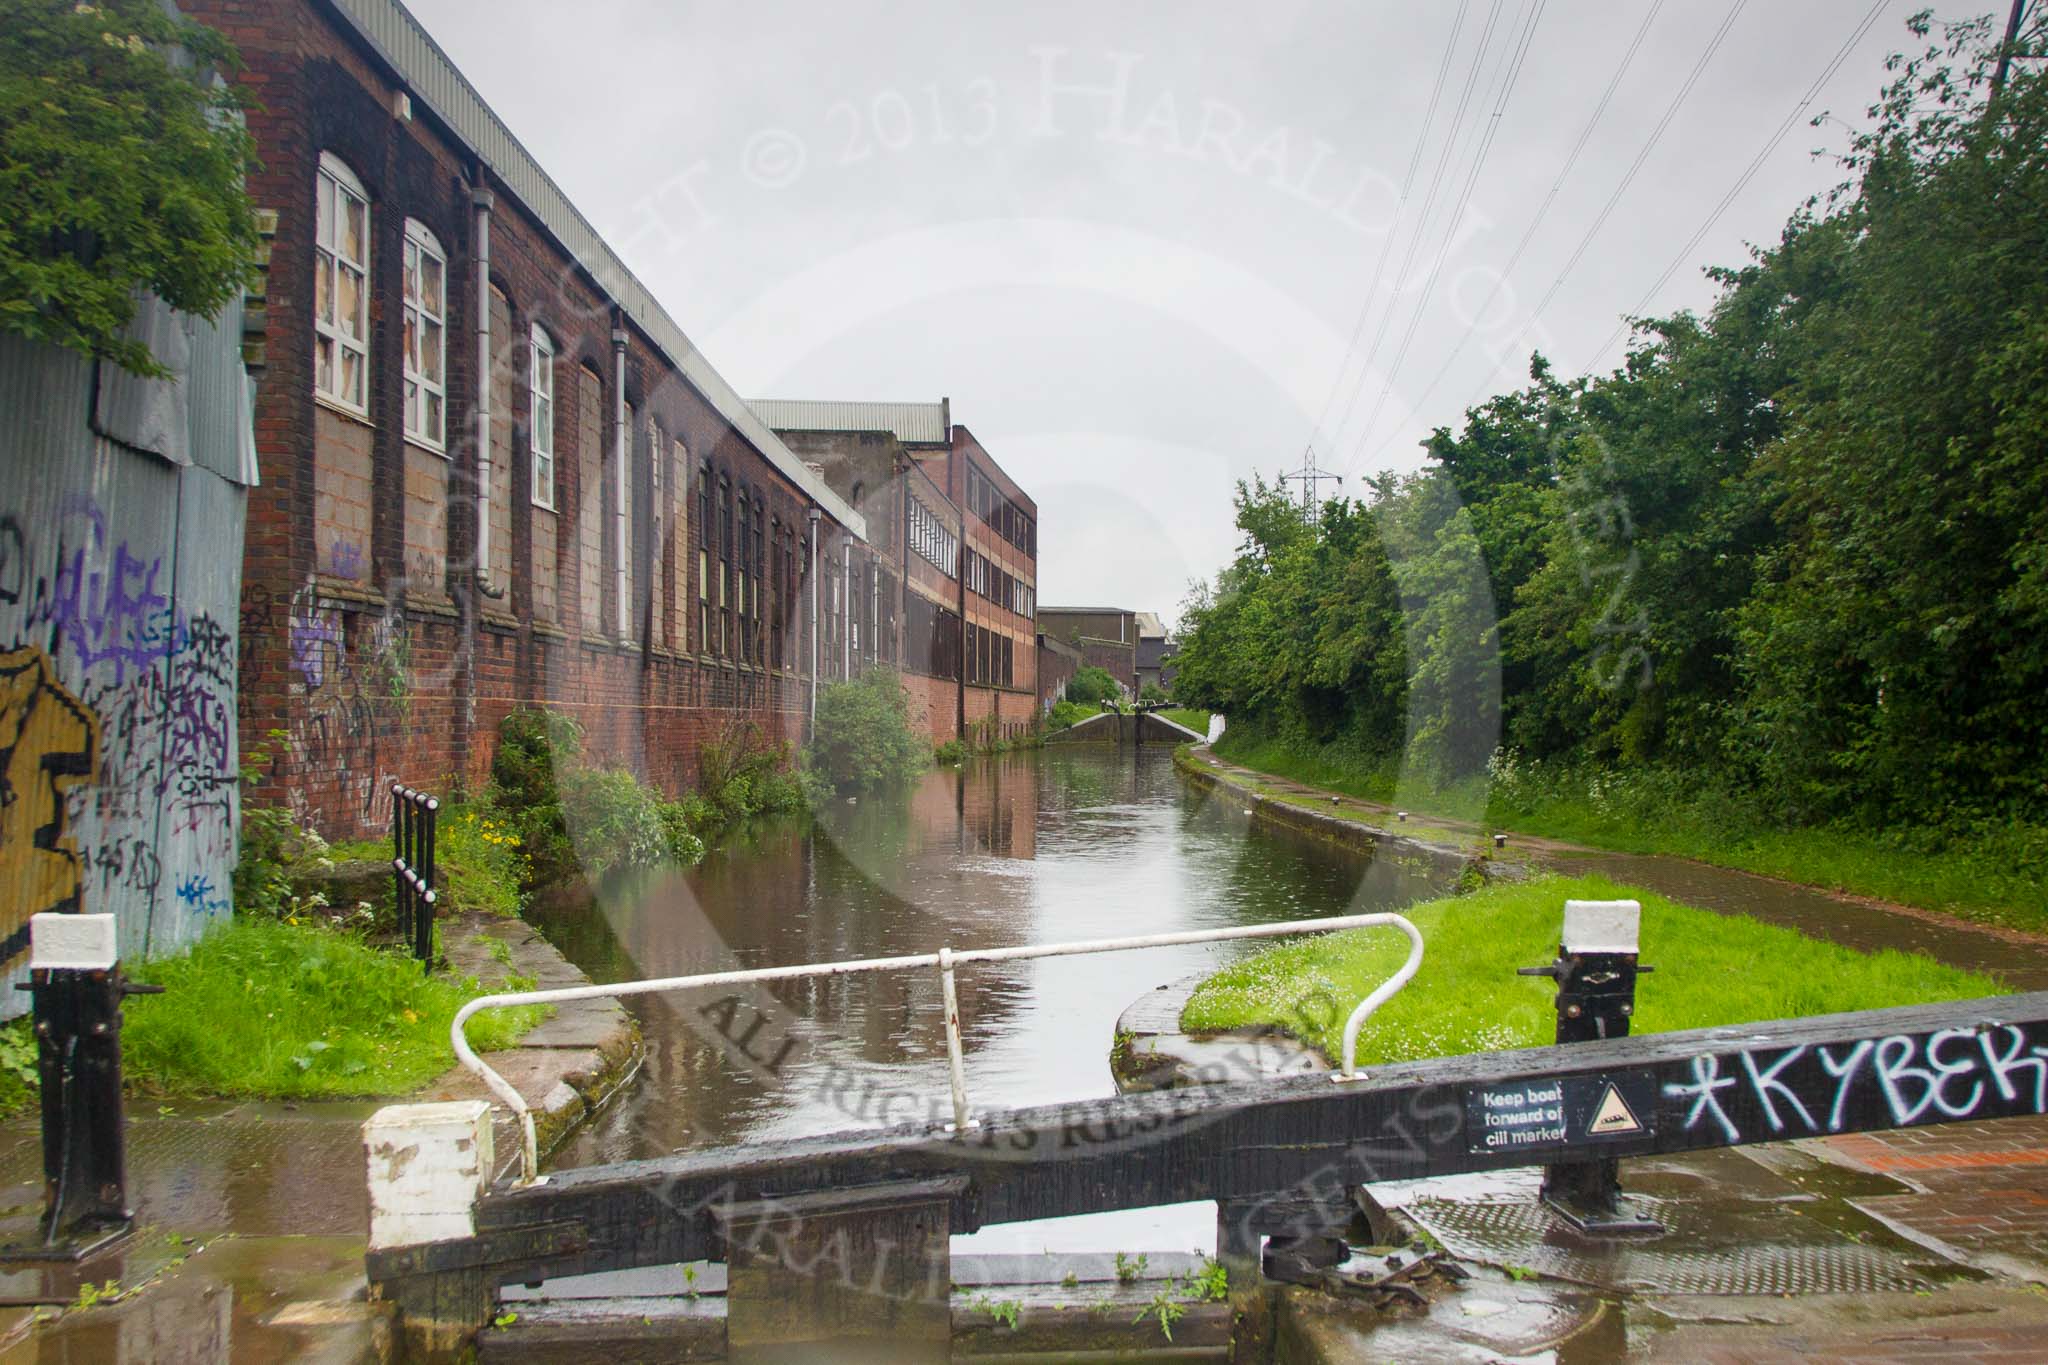 BCN Marathon Challenge 2014: Old canalside industry at Garrison Locks (fourth lock, with the third lock in the distance) on the Grand Union Canal (Birmingham & Warwick Junction Canal)..
Birmingham Canal Navigation,


United Kingdom,
on 23 May 2014 at 17:30, image #70